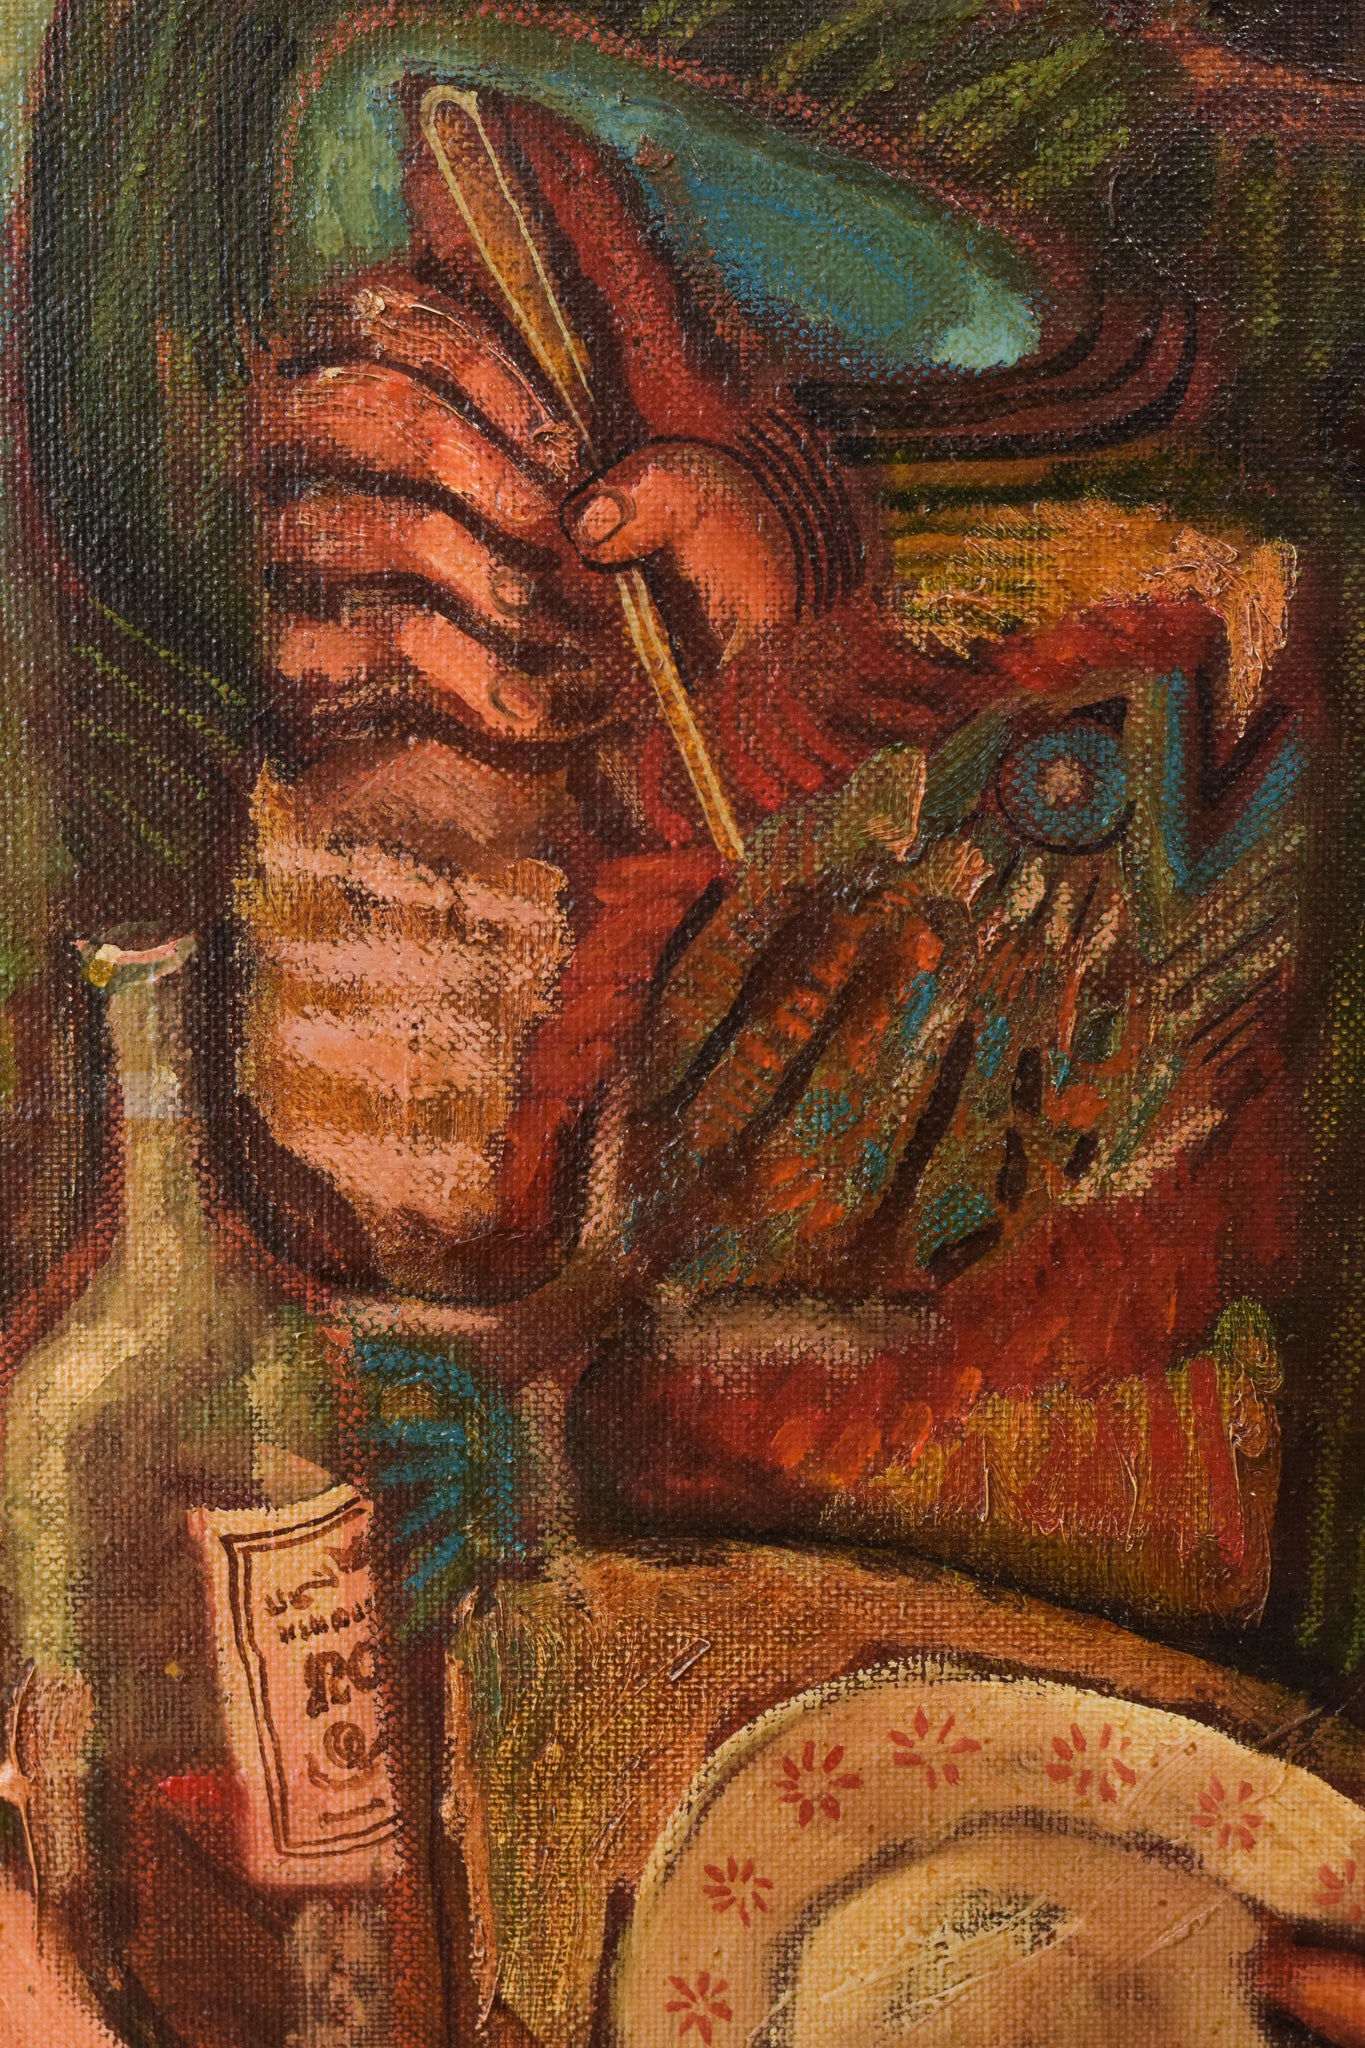 Couple Having Lunch - Oil on Canvas